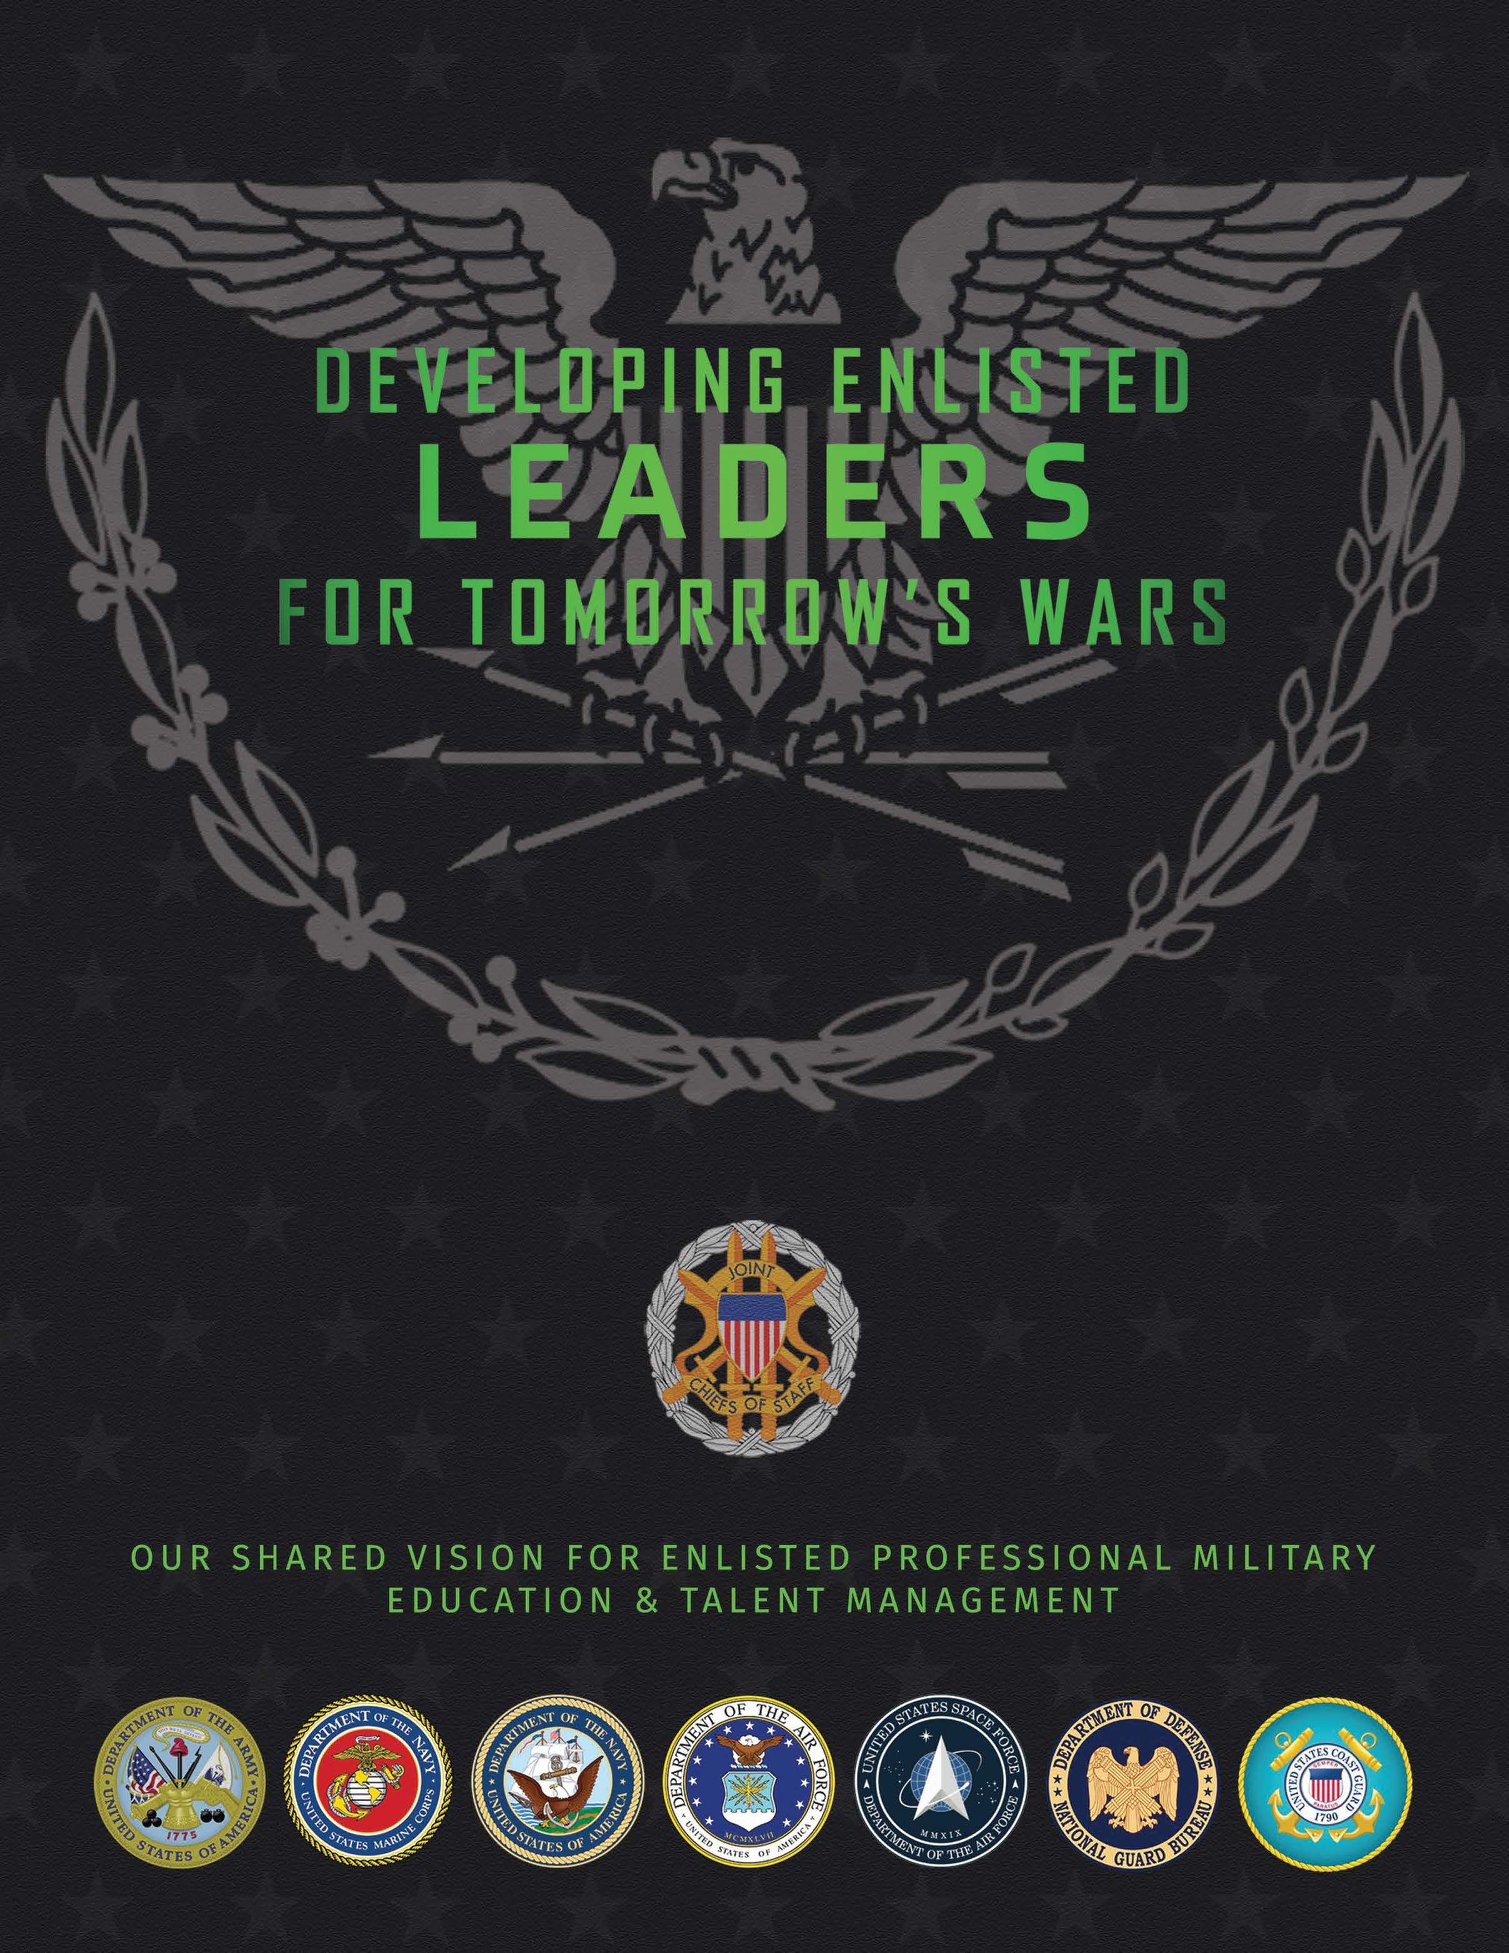 Enlisted Joint Professional Military Vision